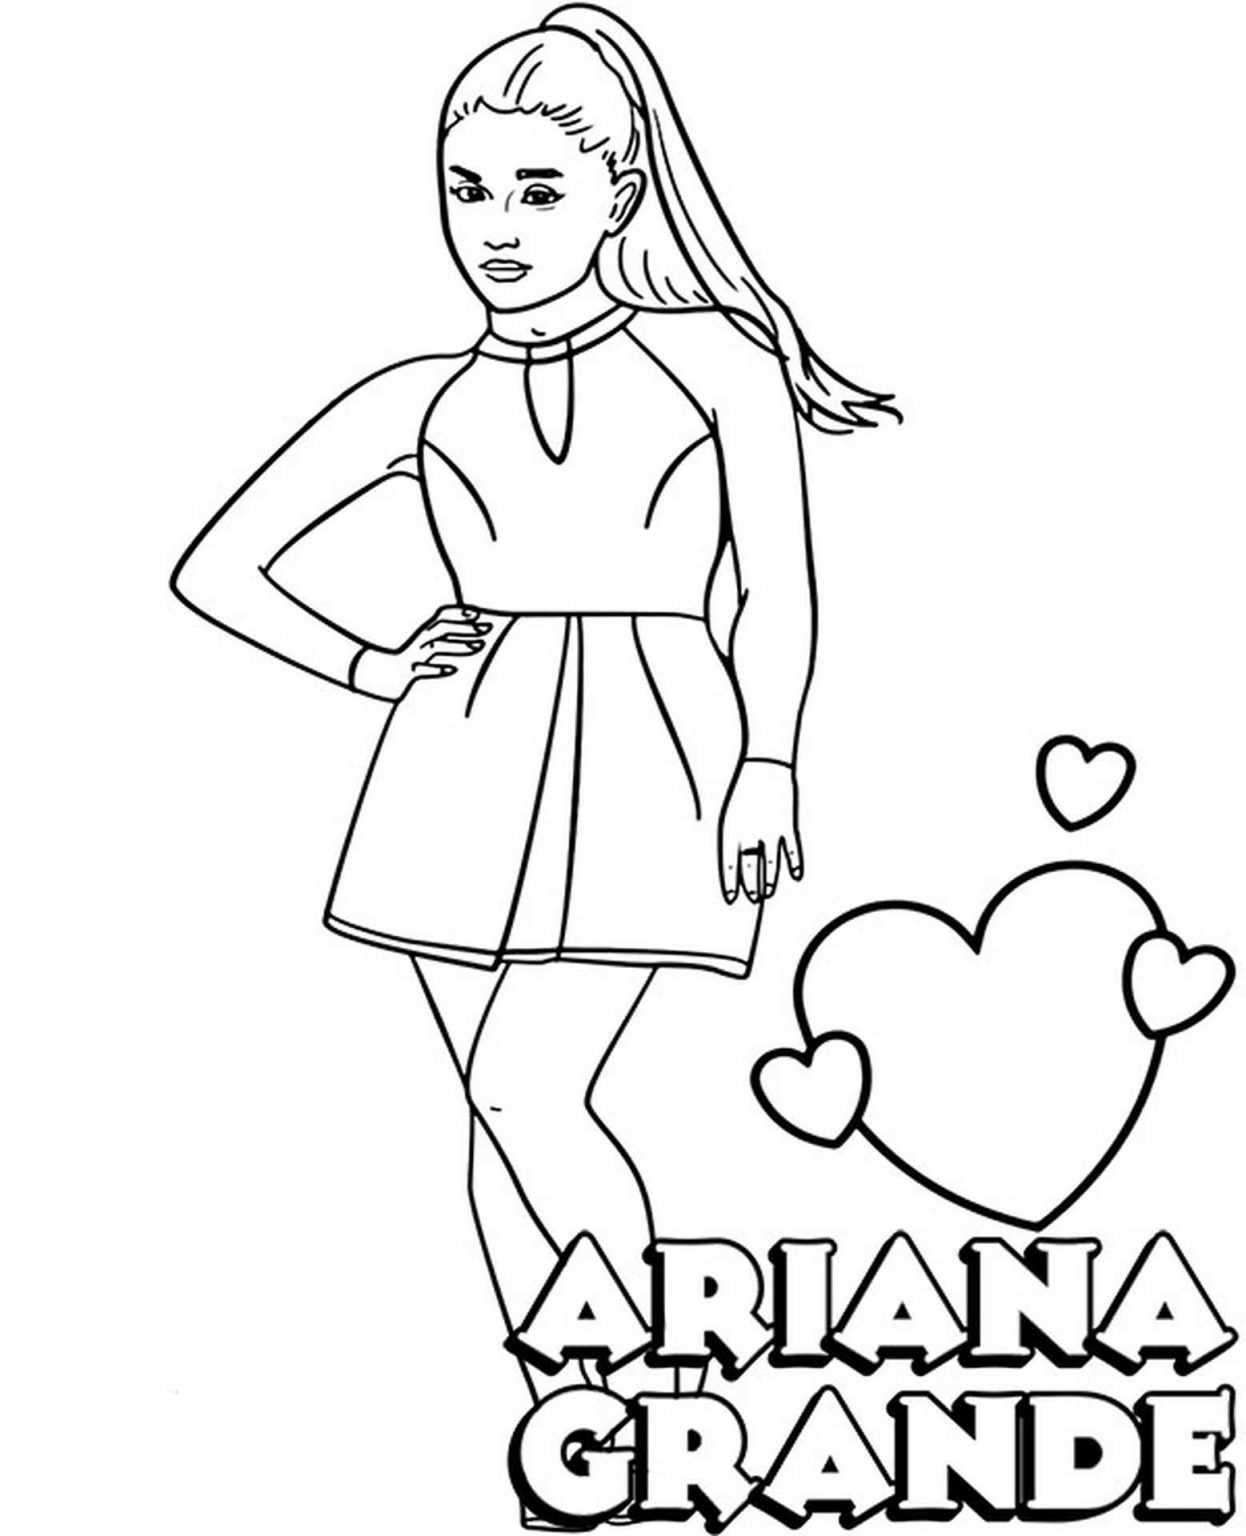 Printable Ariana Grande Coloring Pages Pdf - Ariana Grande Pop Star Coloring Page